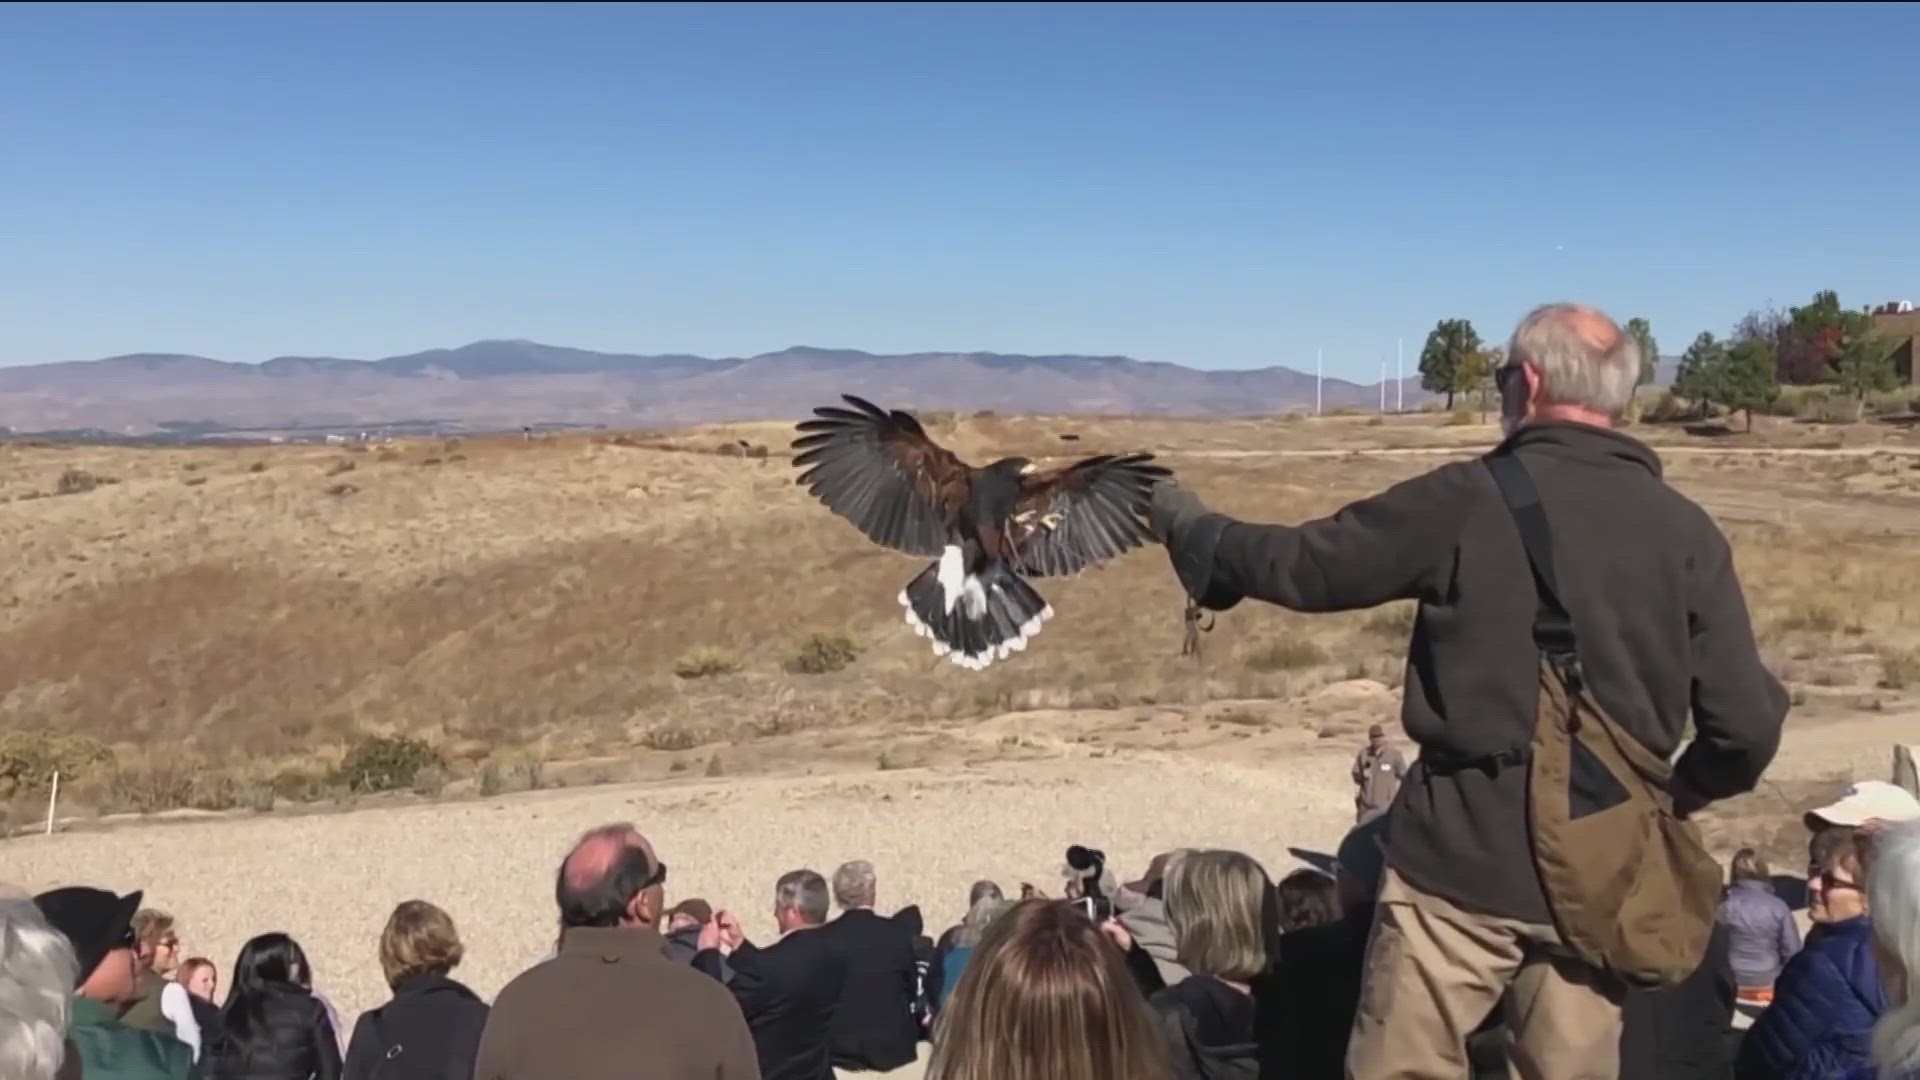 The team in Boise hosts a California Condor breeding program to help restore the population of a species that has been decimated in recent decades.